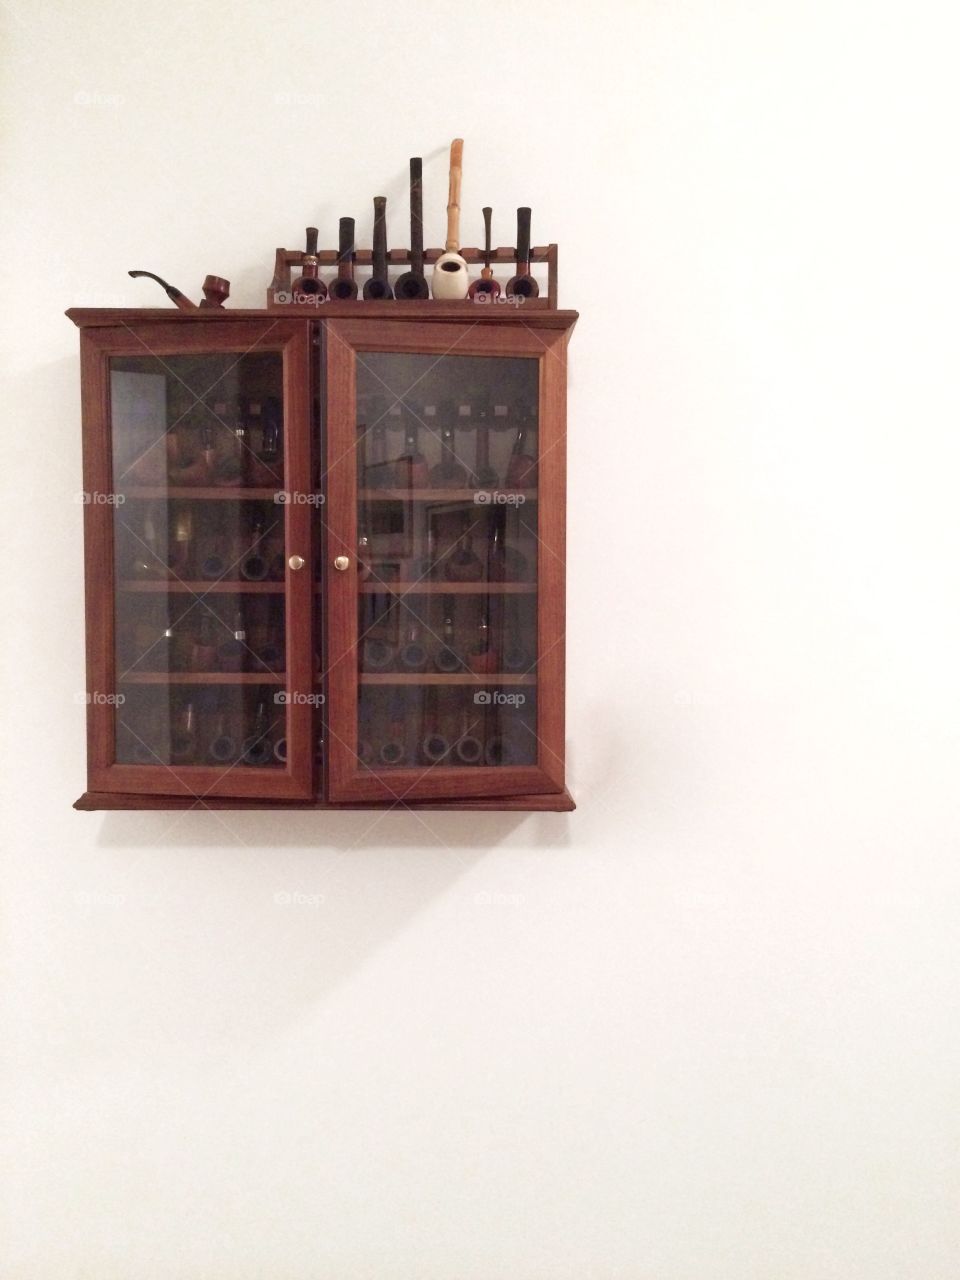 Display cabinet full of pipes